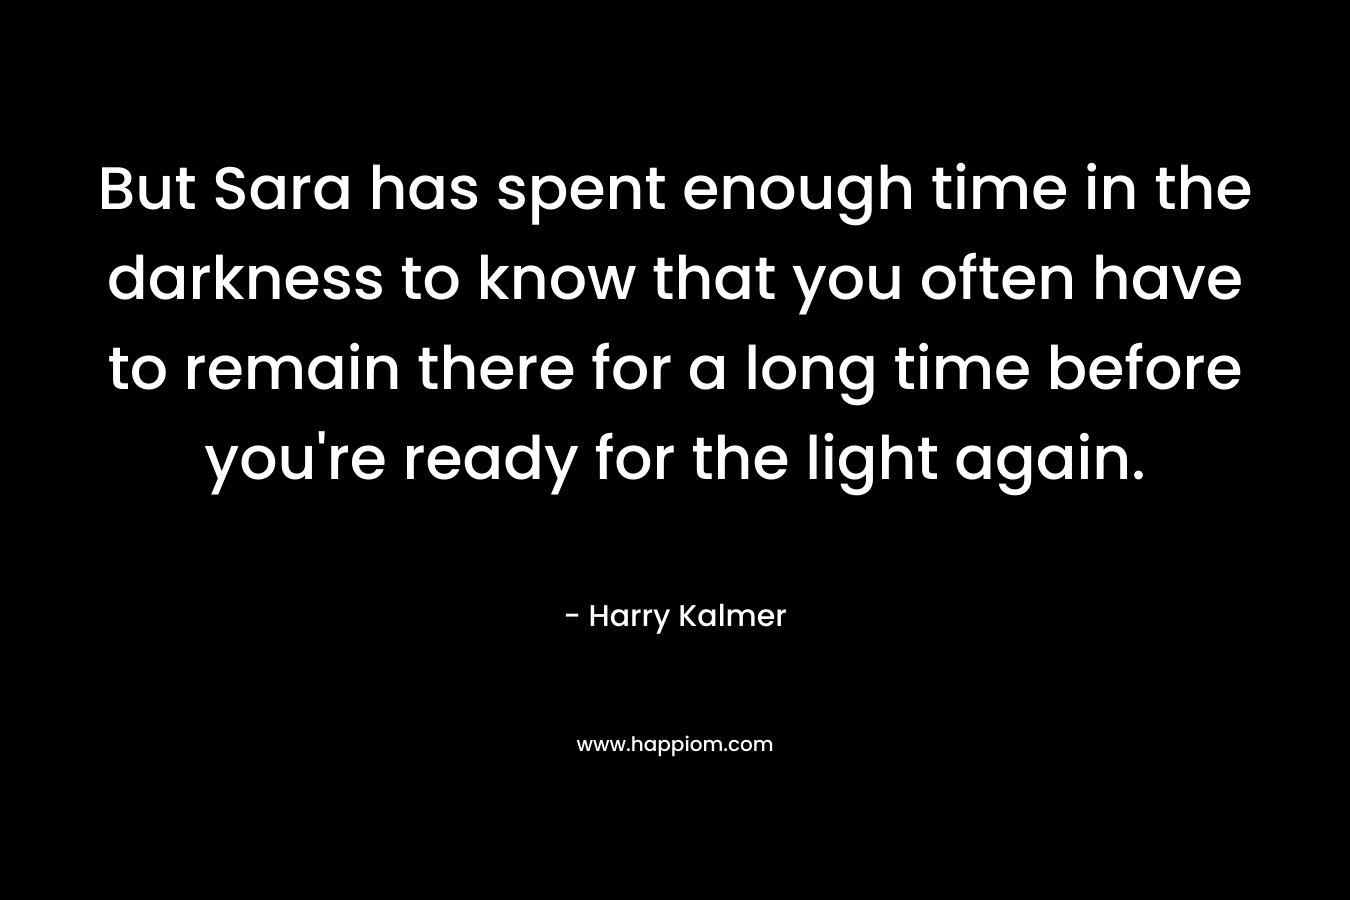 But Sara has spent enough time in the darkness to know that you often have to remain there for a long time before you’re ready for the light again. – Harry Kalmer